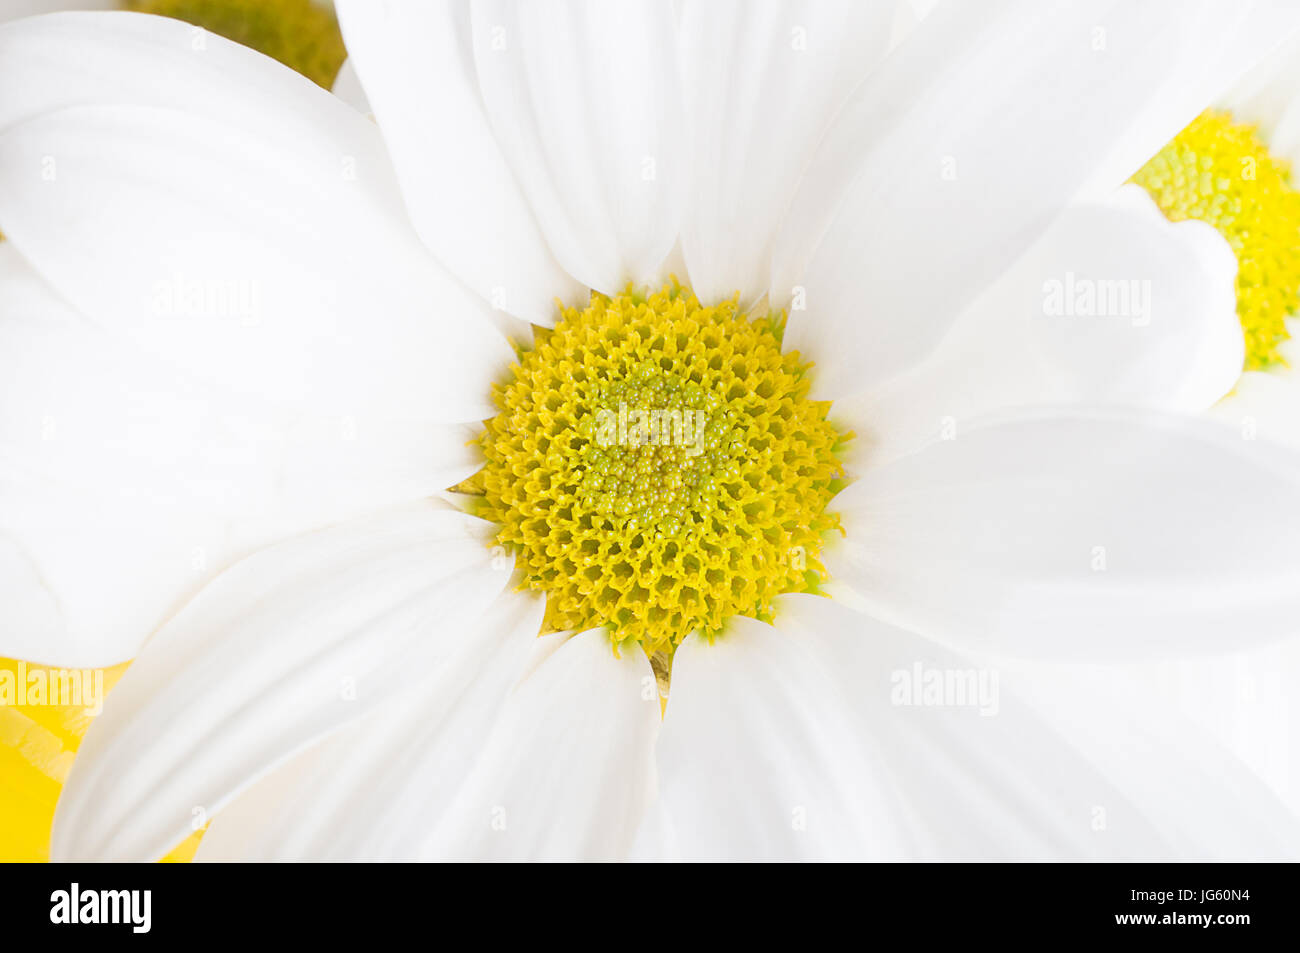 Close up (macro) shot of a white, daisy shaped Chrysanthemum ('Mum flower') with yellow pollen in sharp focus at centre of frame. Stock Photo